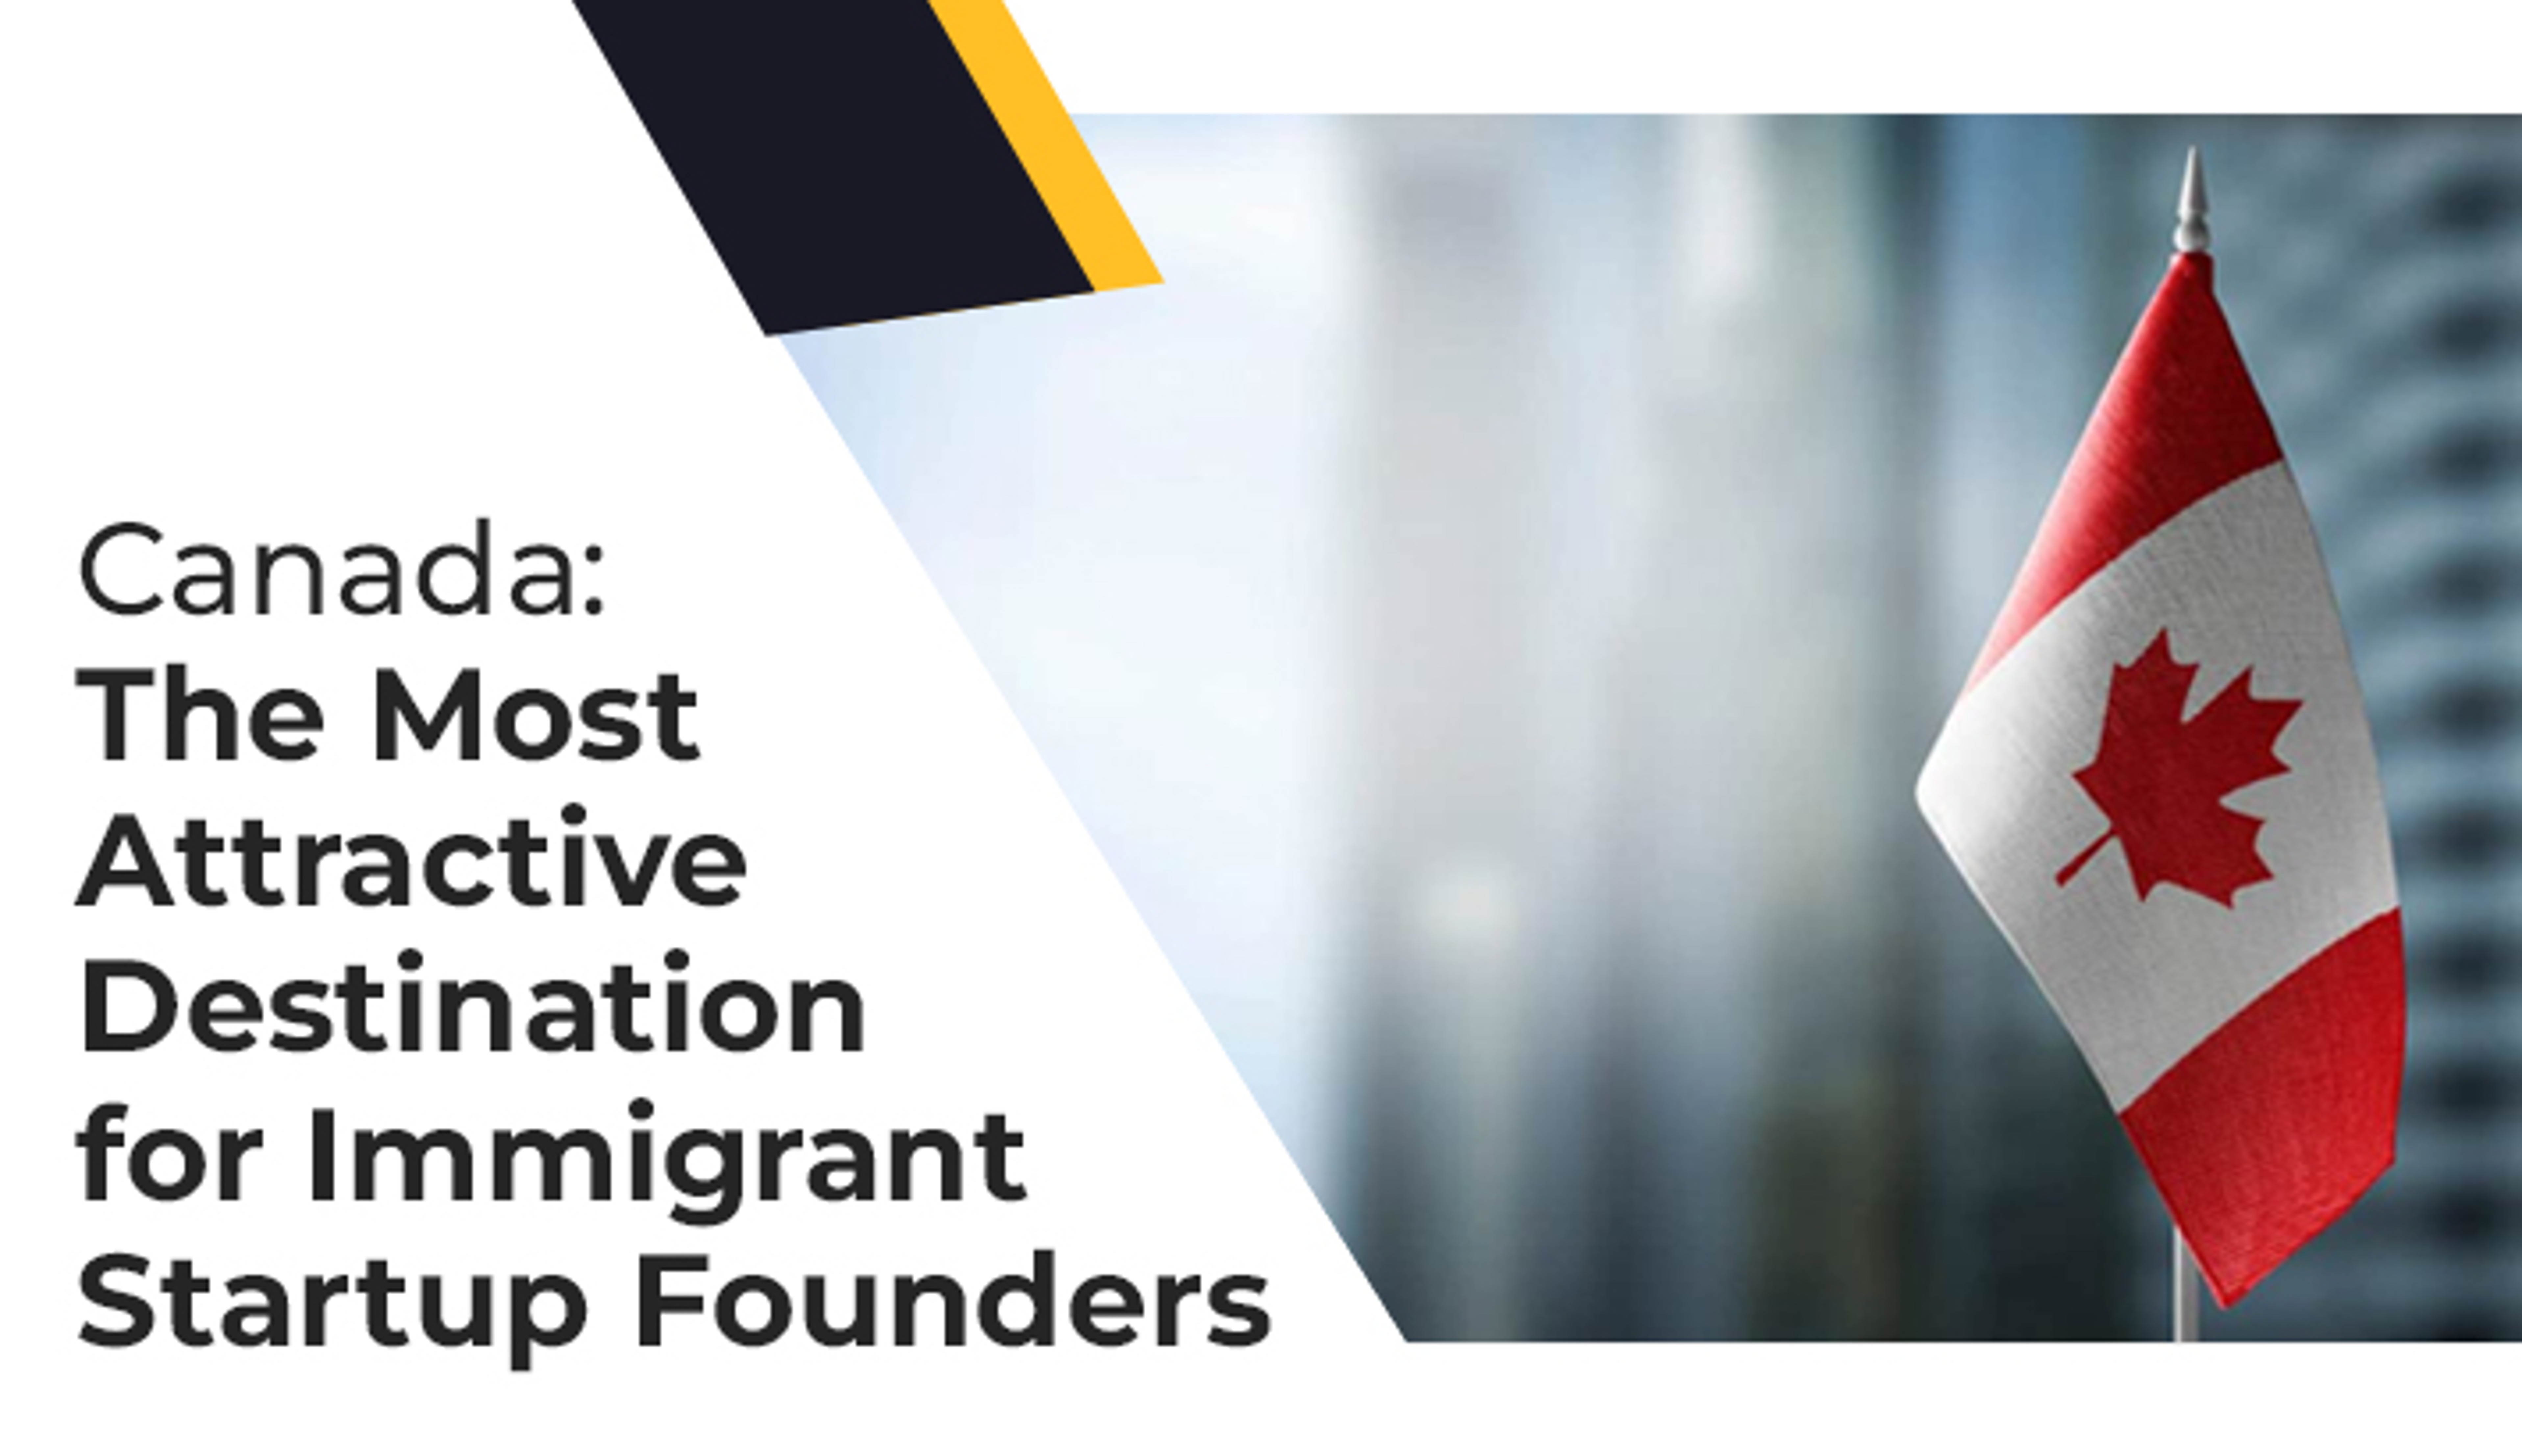 The Most Attractive Destination for Immigrant Startup Founders